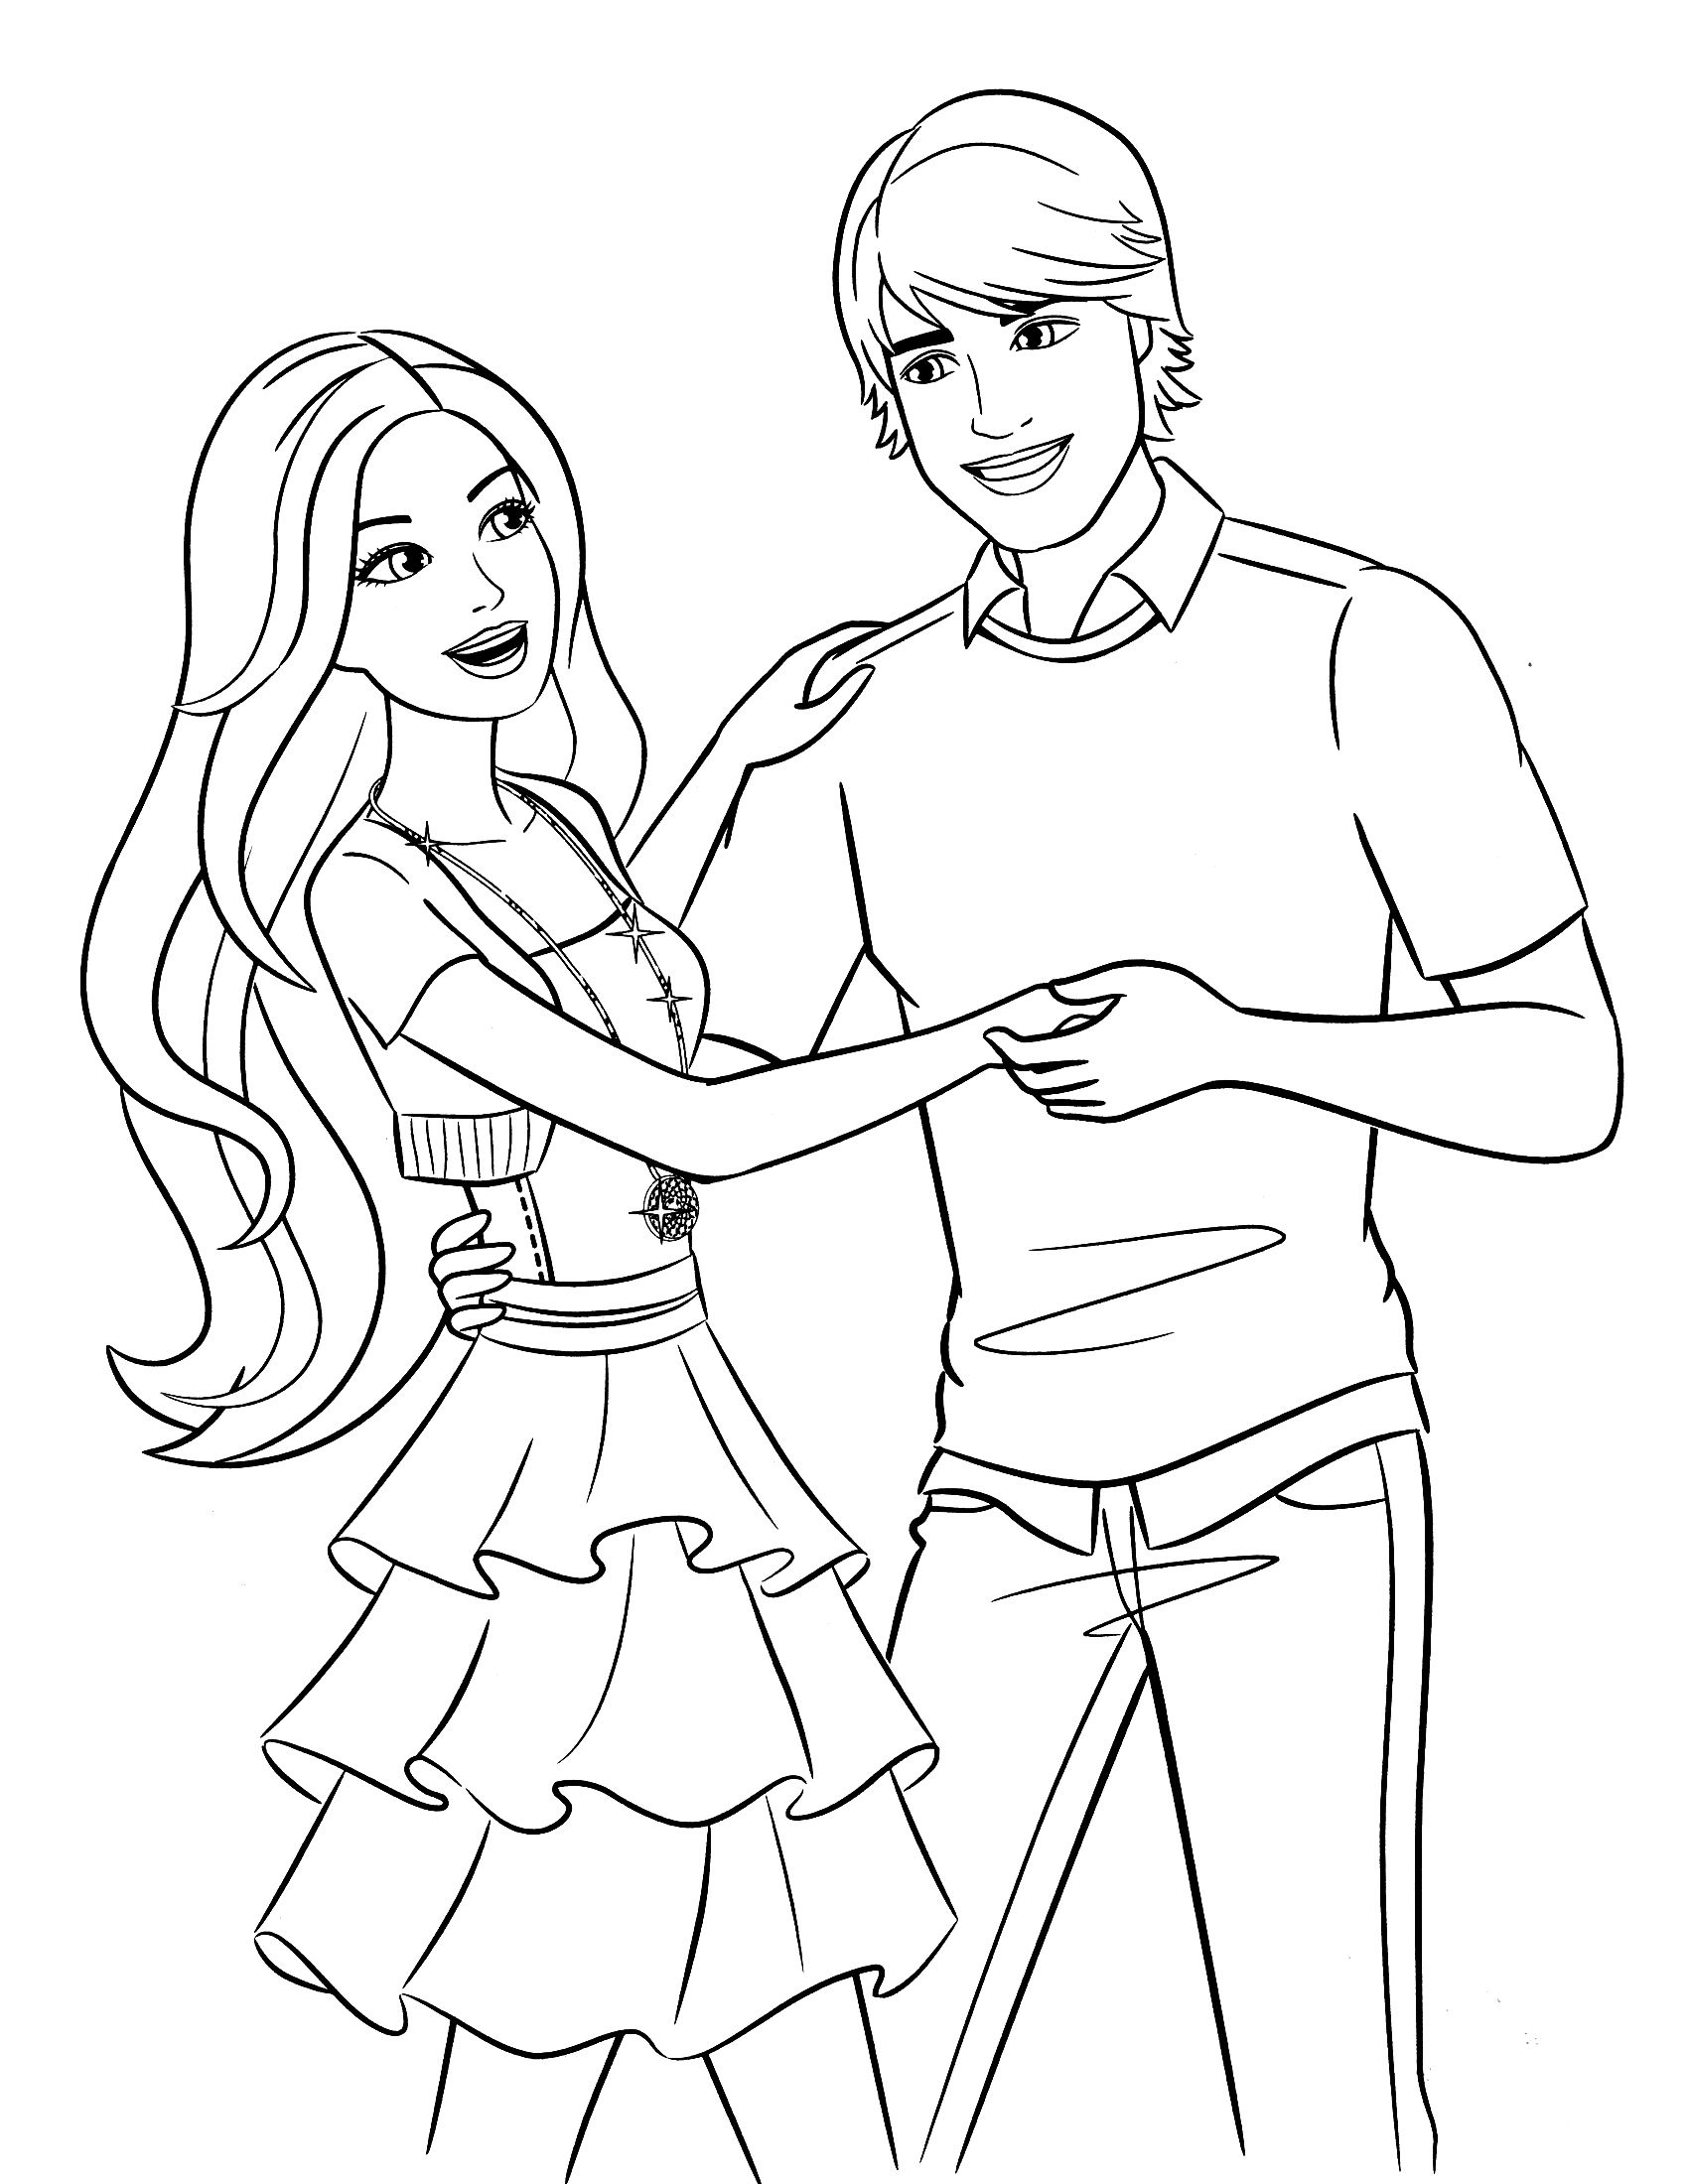 barbie doll coloring pages barbie dolls coloring sheets for kids girls cartoon barbie pages coloring doll 